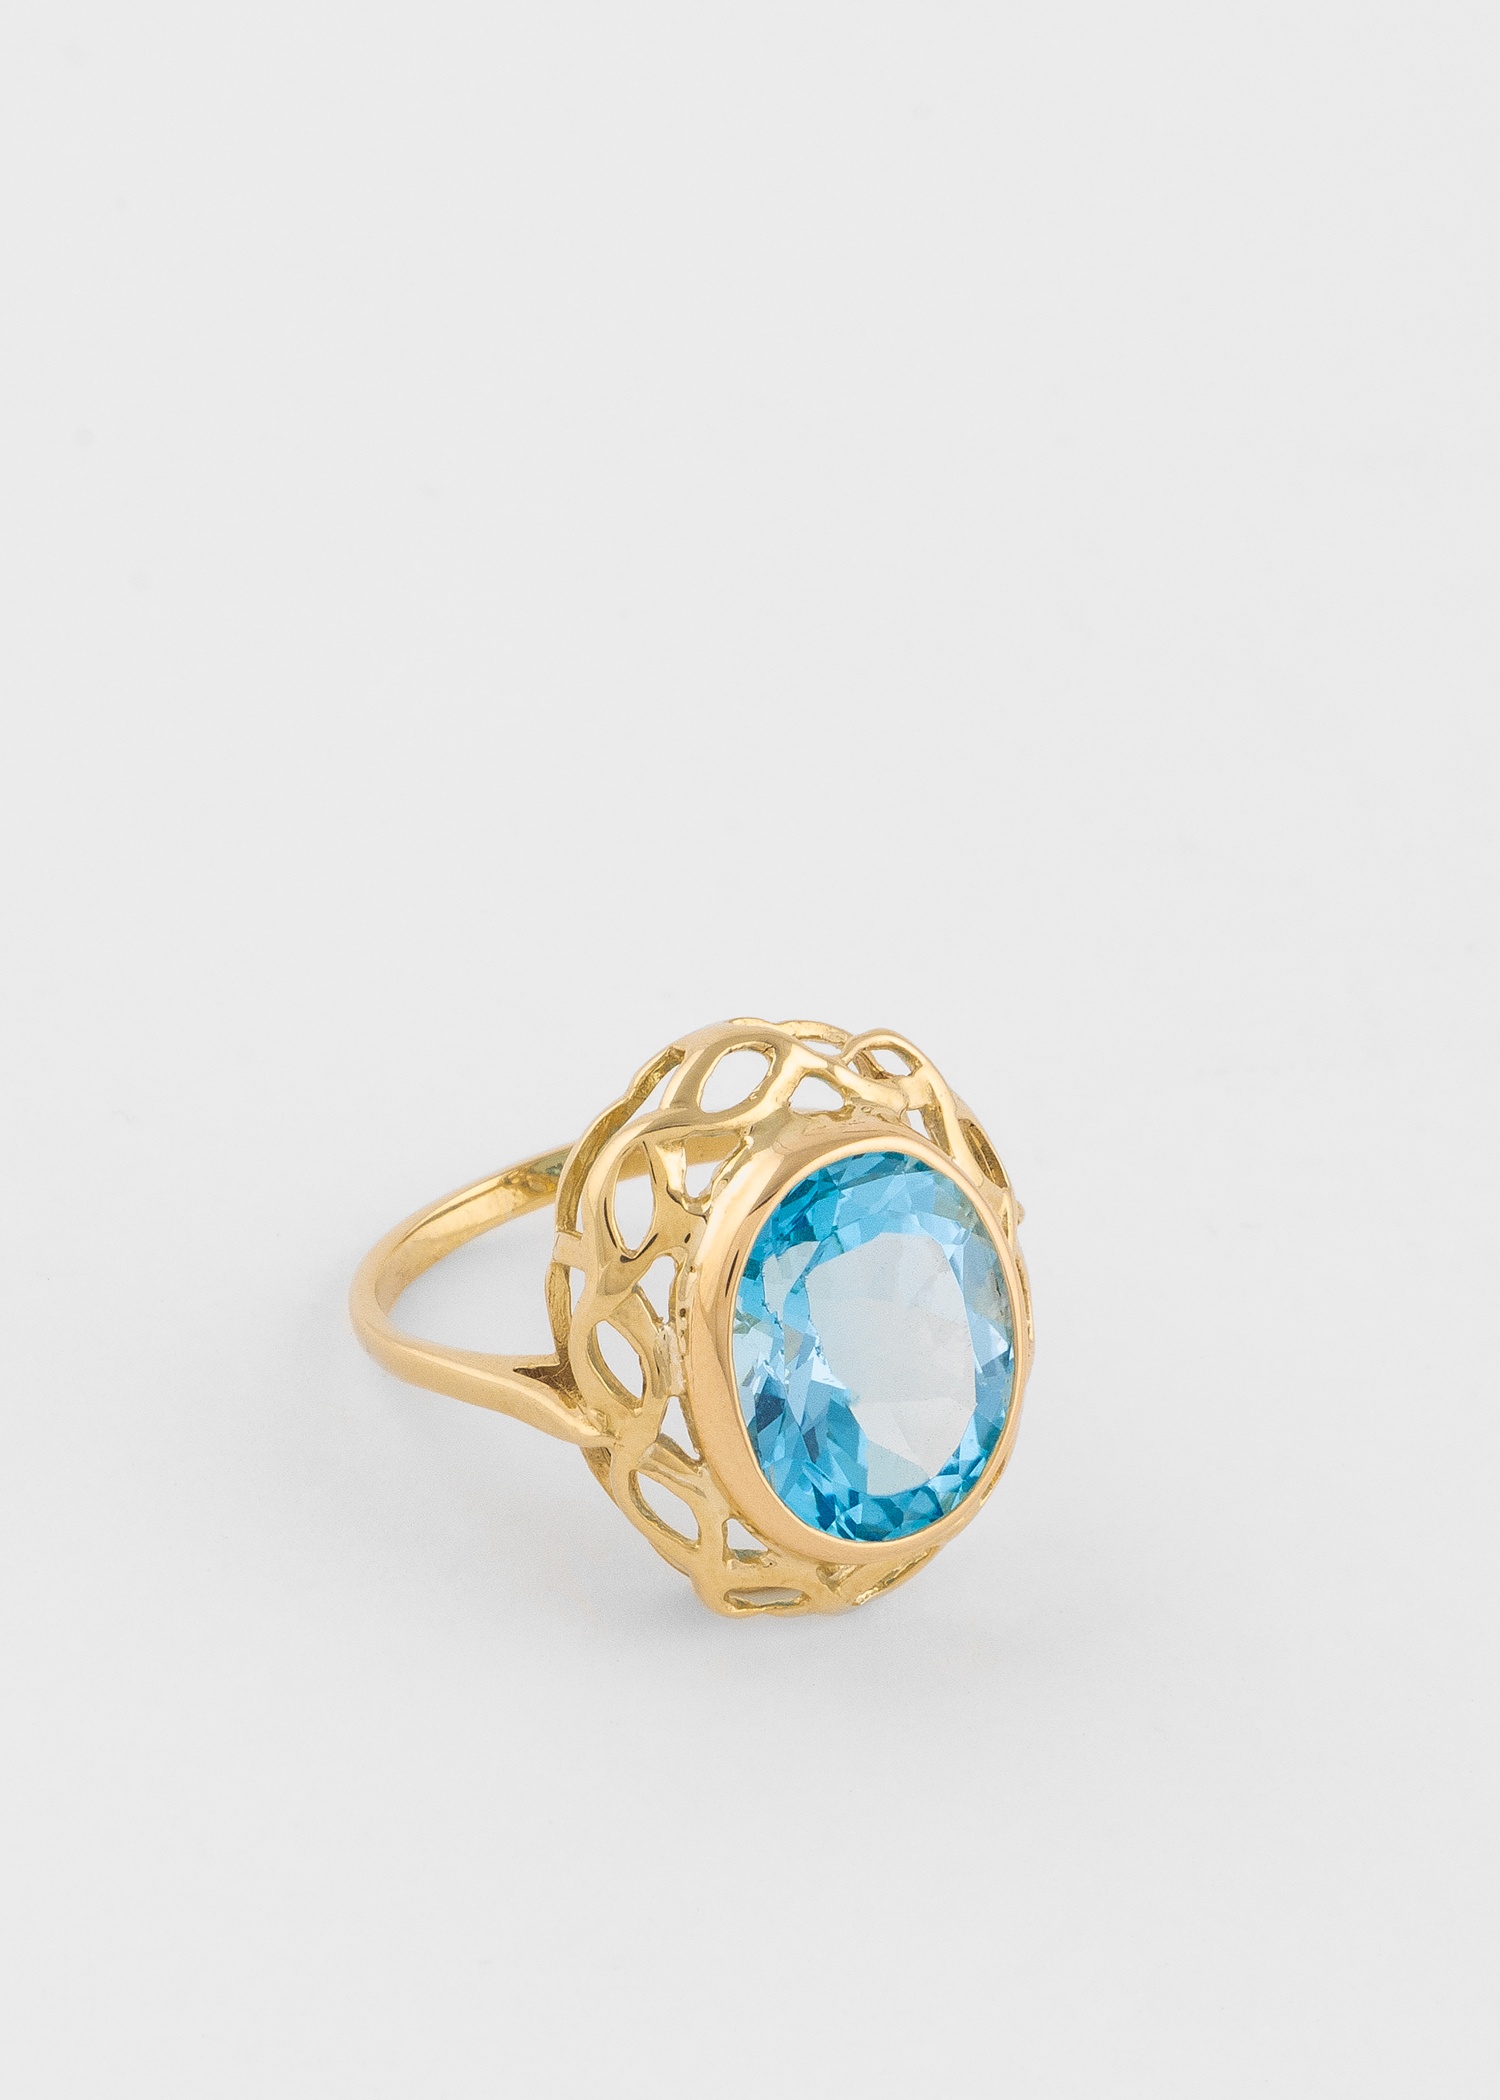 'Enormous Sky Blue Topaz' Gold Cocktail Ring - 2